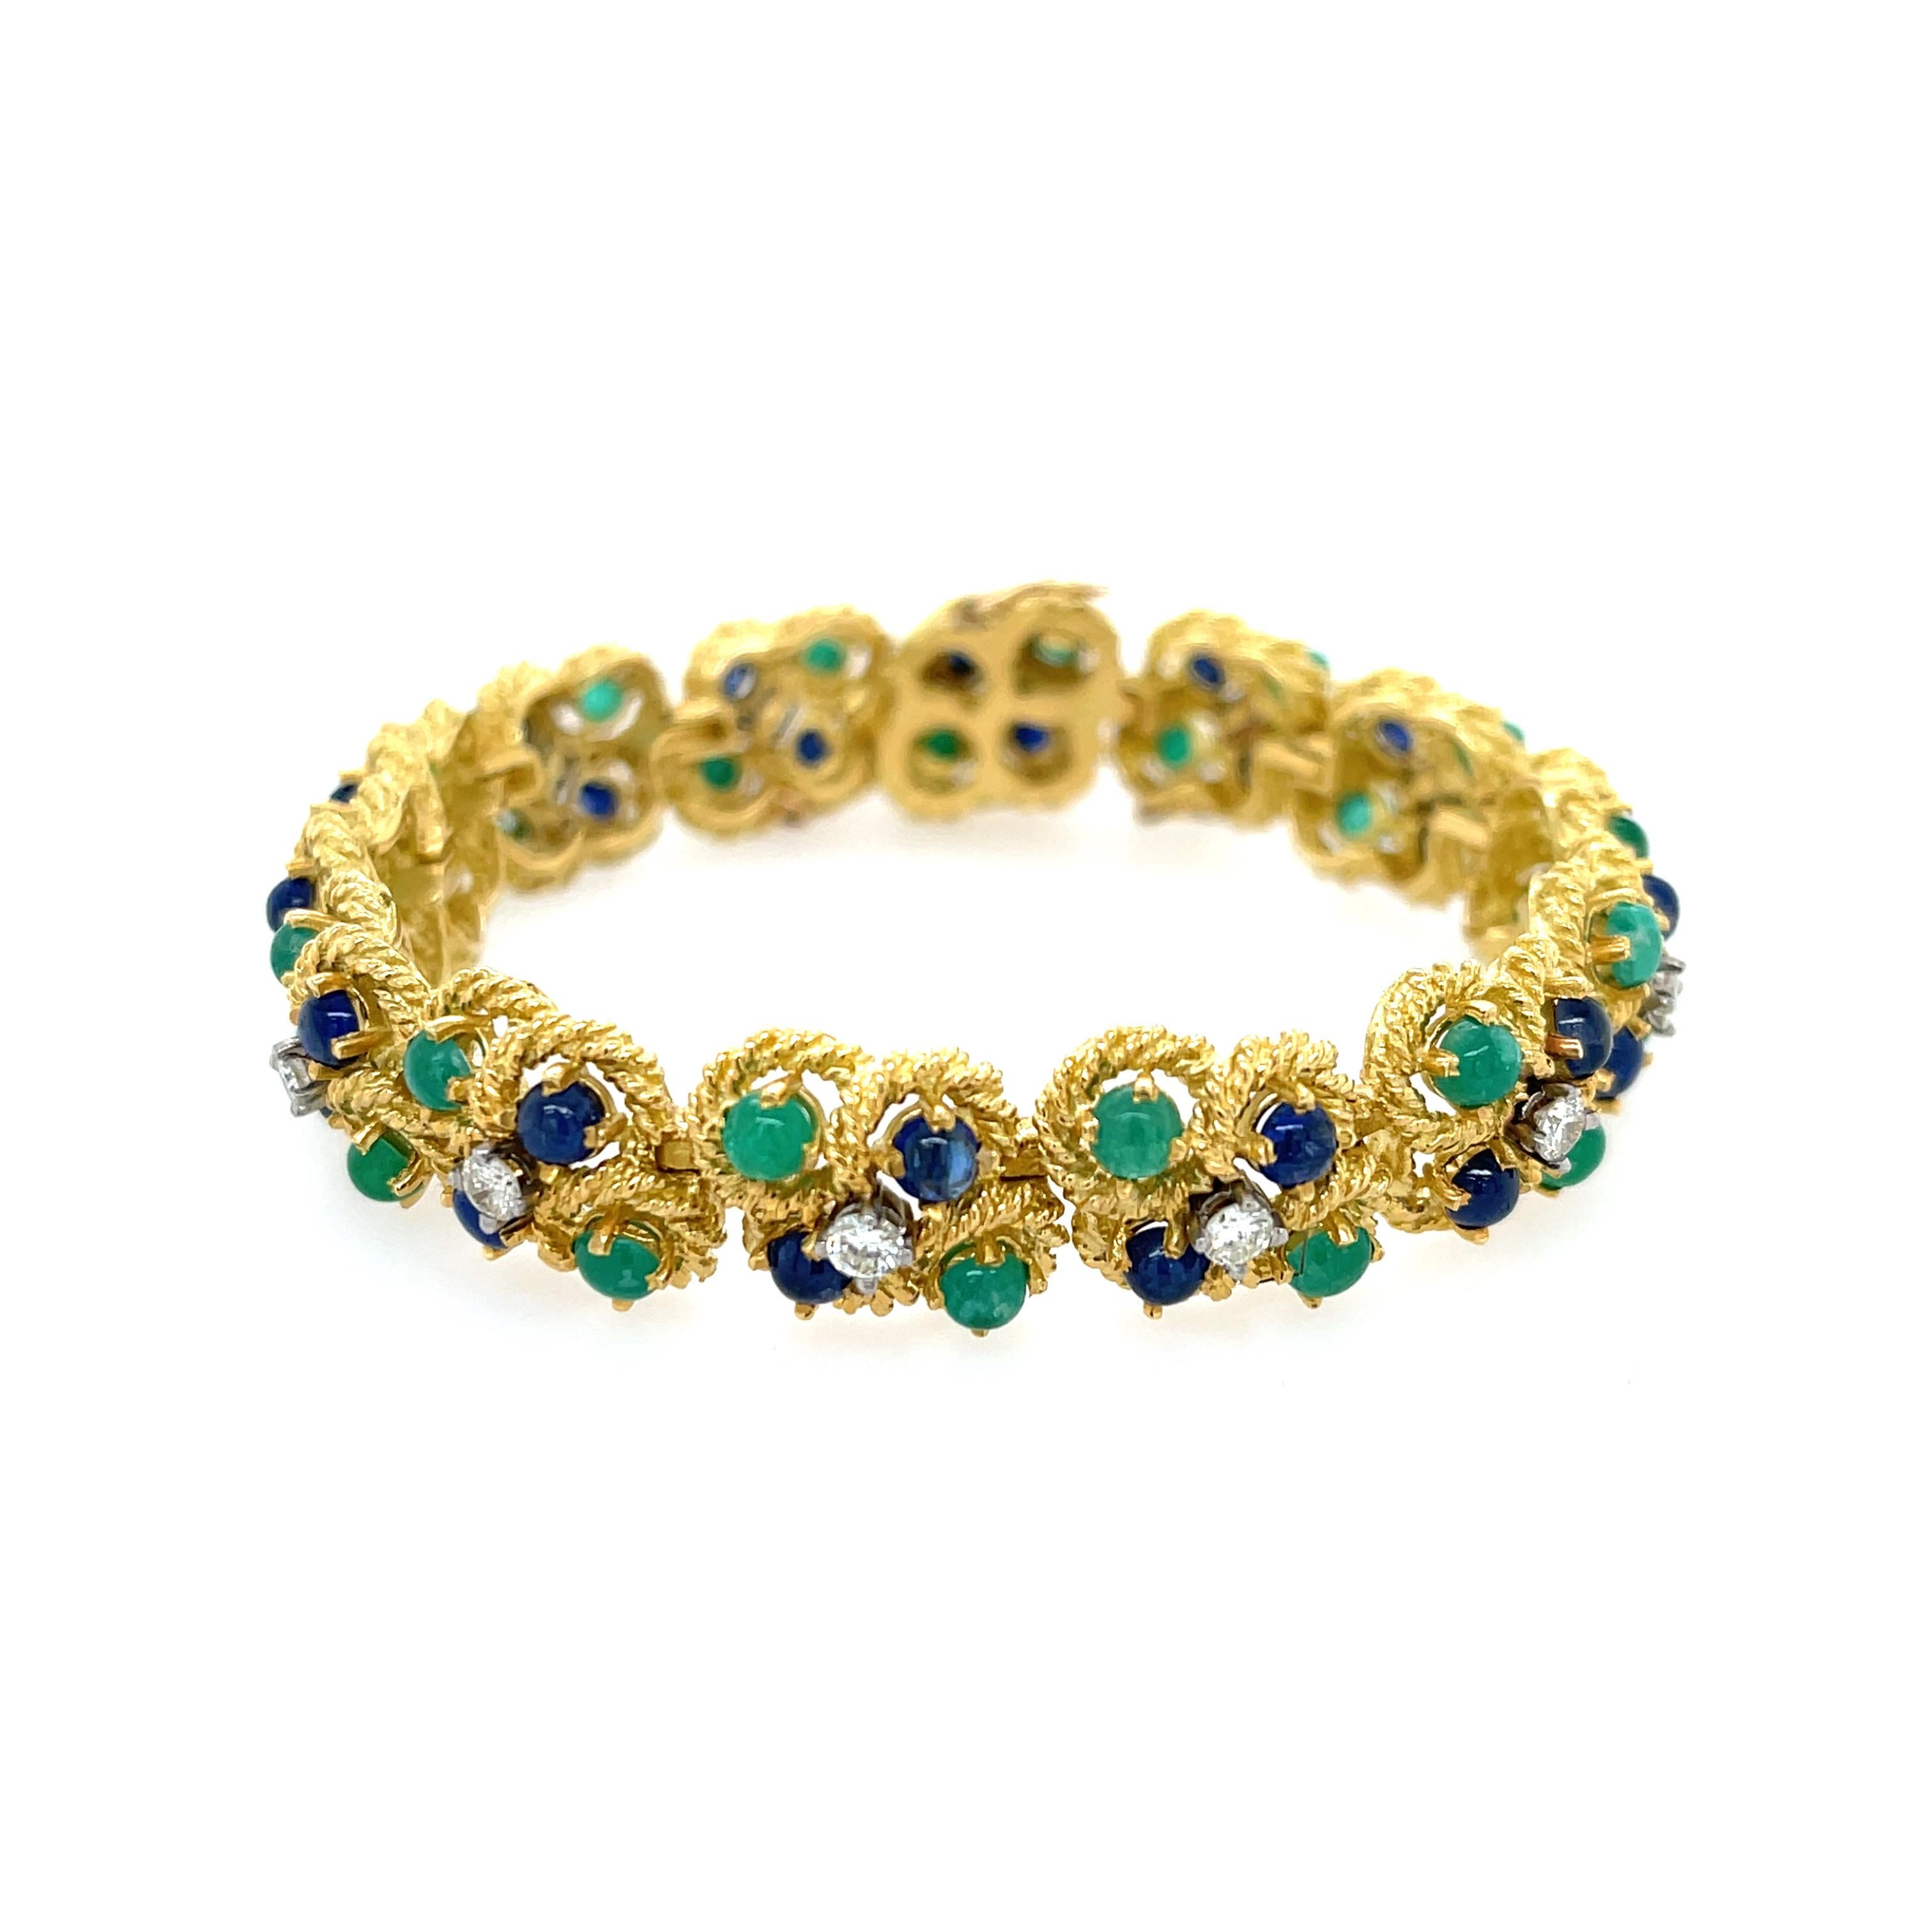 Cluster Emerald, Sapphire, and Diamond Bracelet in 18K Yellow Gold. The bracelet features 28 cabochon emeralds, 28 cabochon sapphires, and 14 round diamonds (1ctw, H color, SI1 clarity).
8